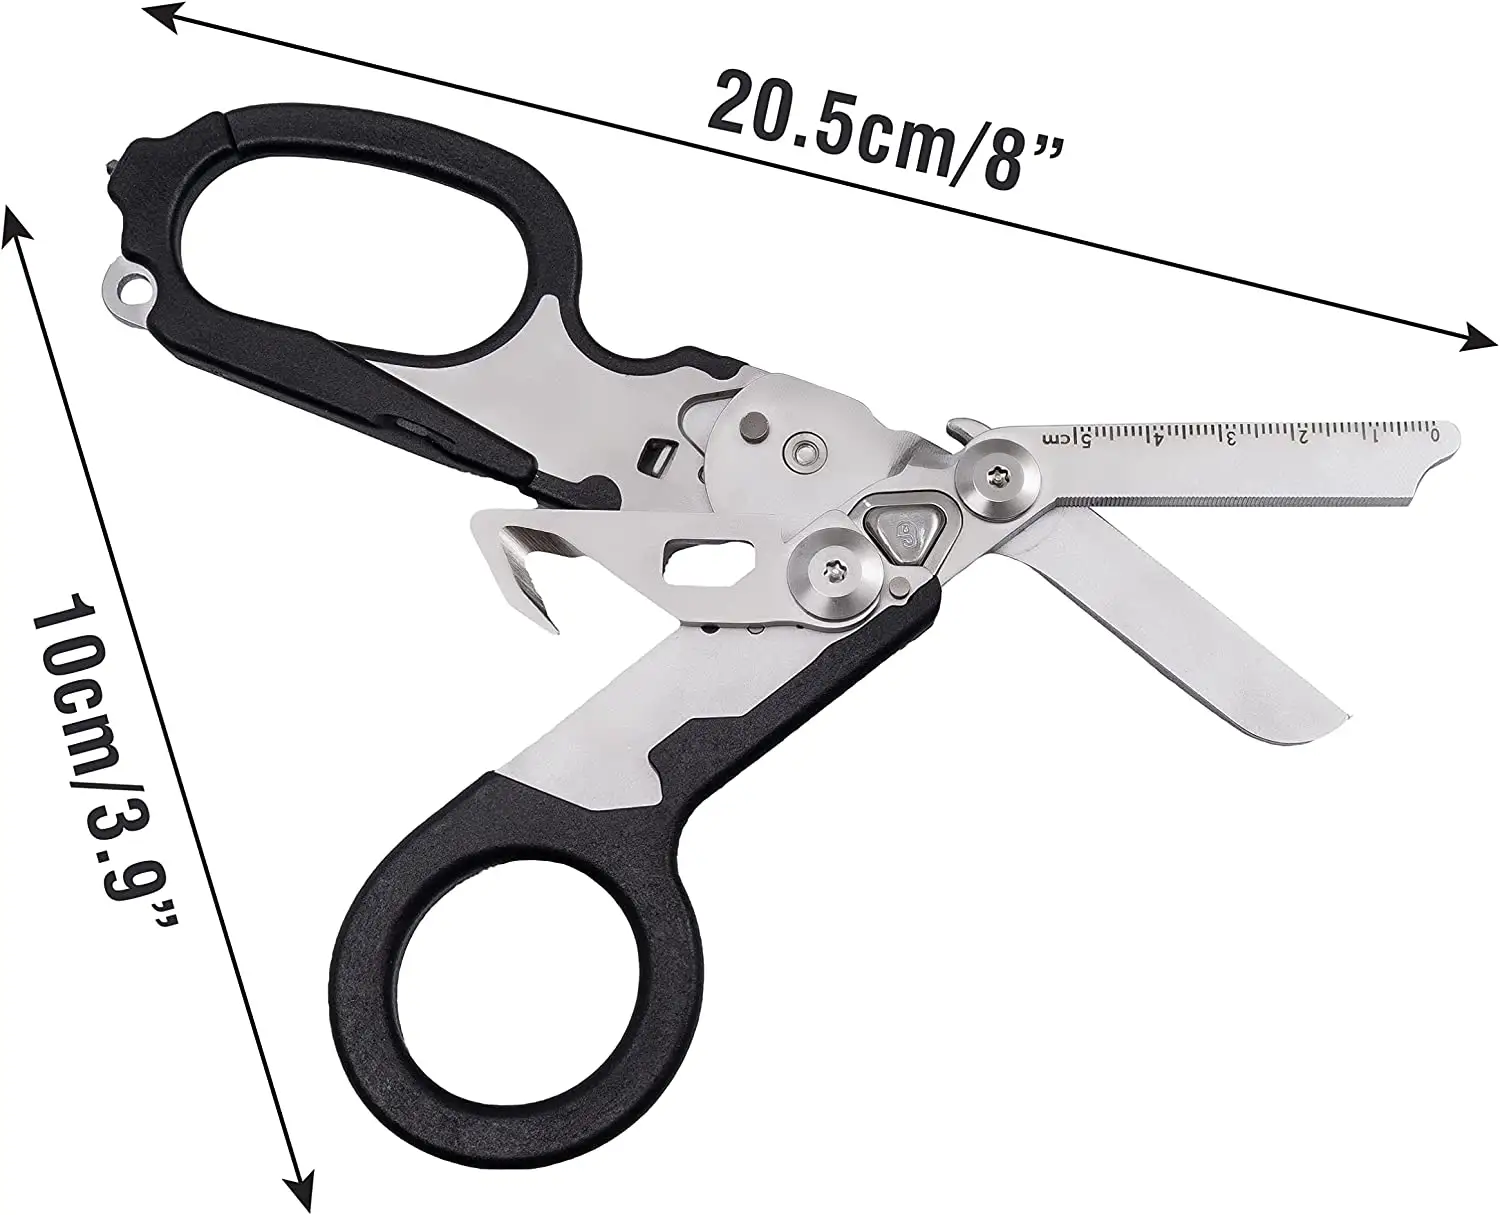 Raptor Emergency Response Shears Stainless Steel Foldable Scissors Pliers Outdoor Camping Rescue Scissors Tools With Scabbard